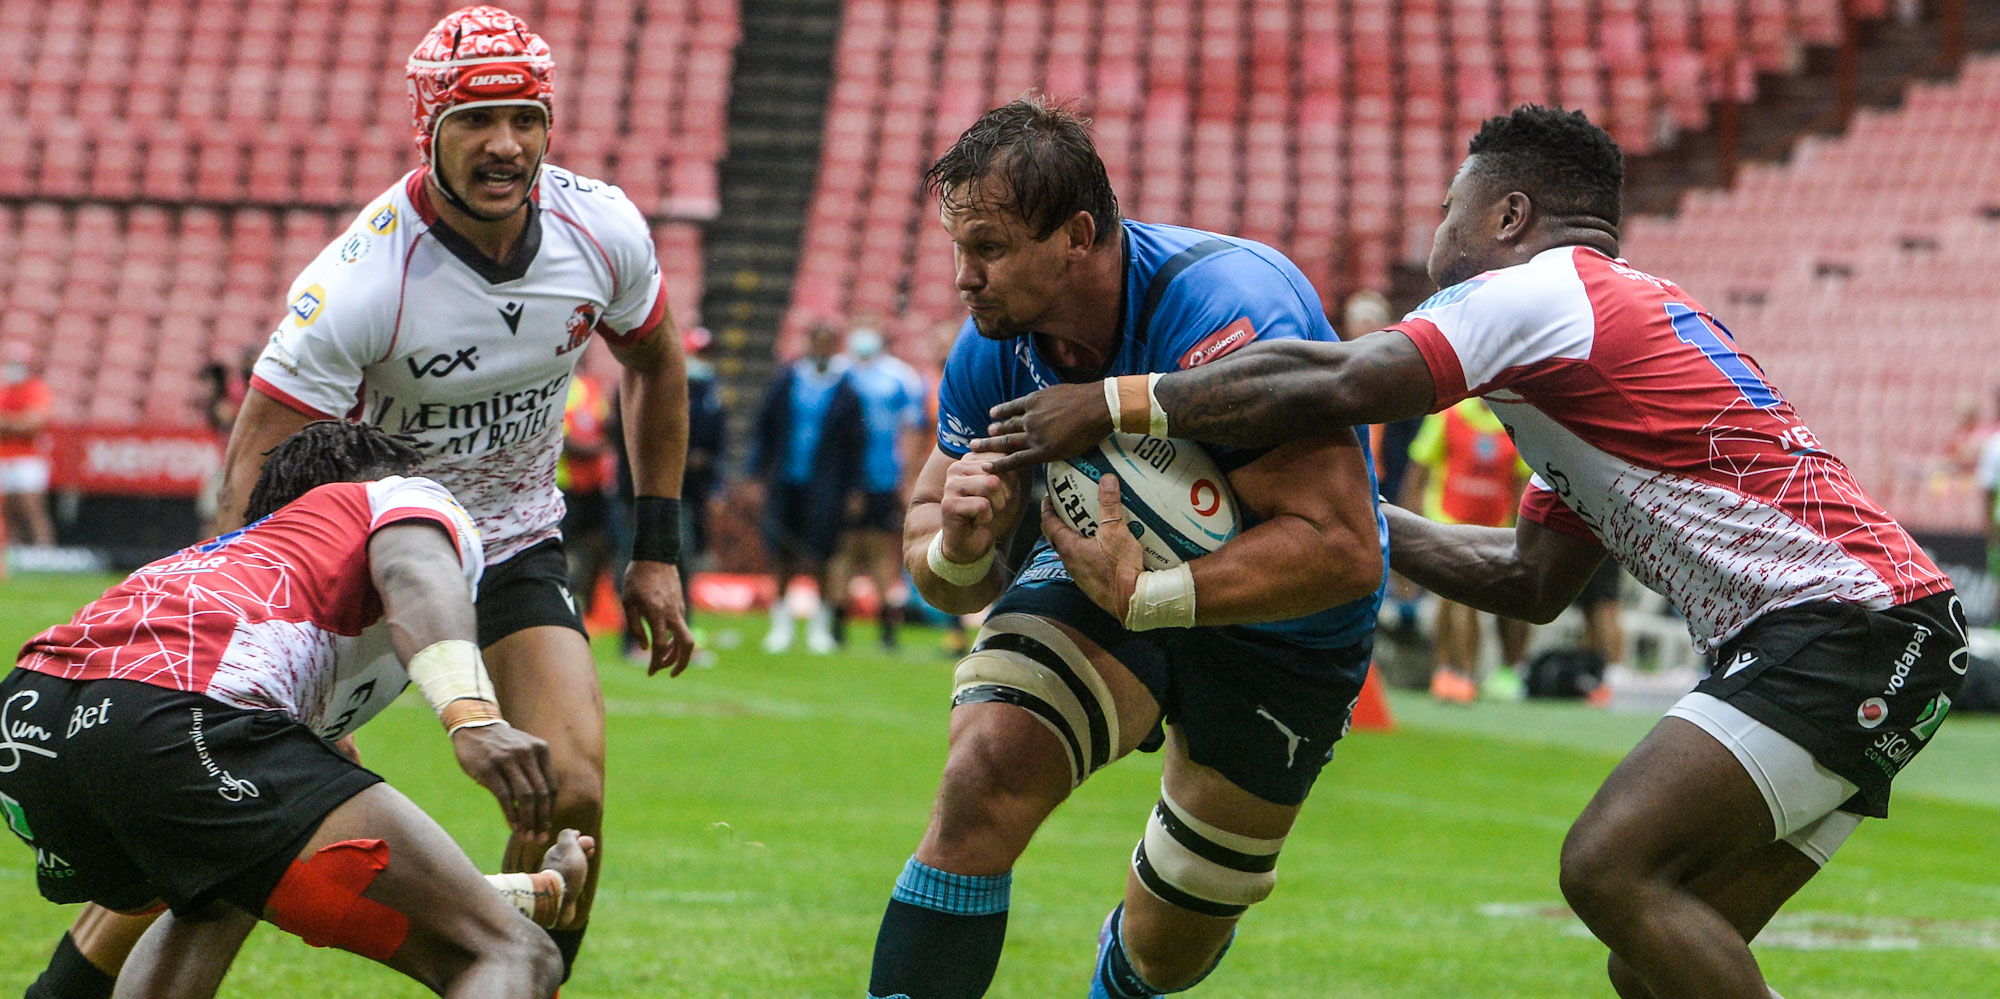 Arno Botha scored the Vodacom Bulls' third try as the rain started coming down in Johannesburg.